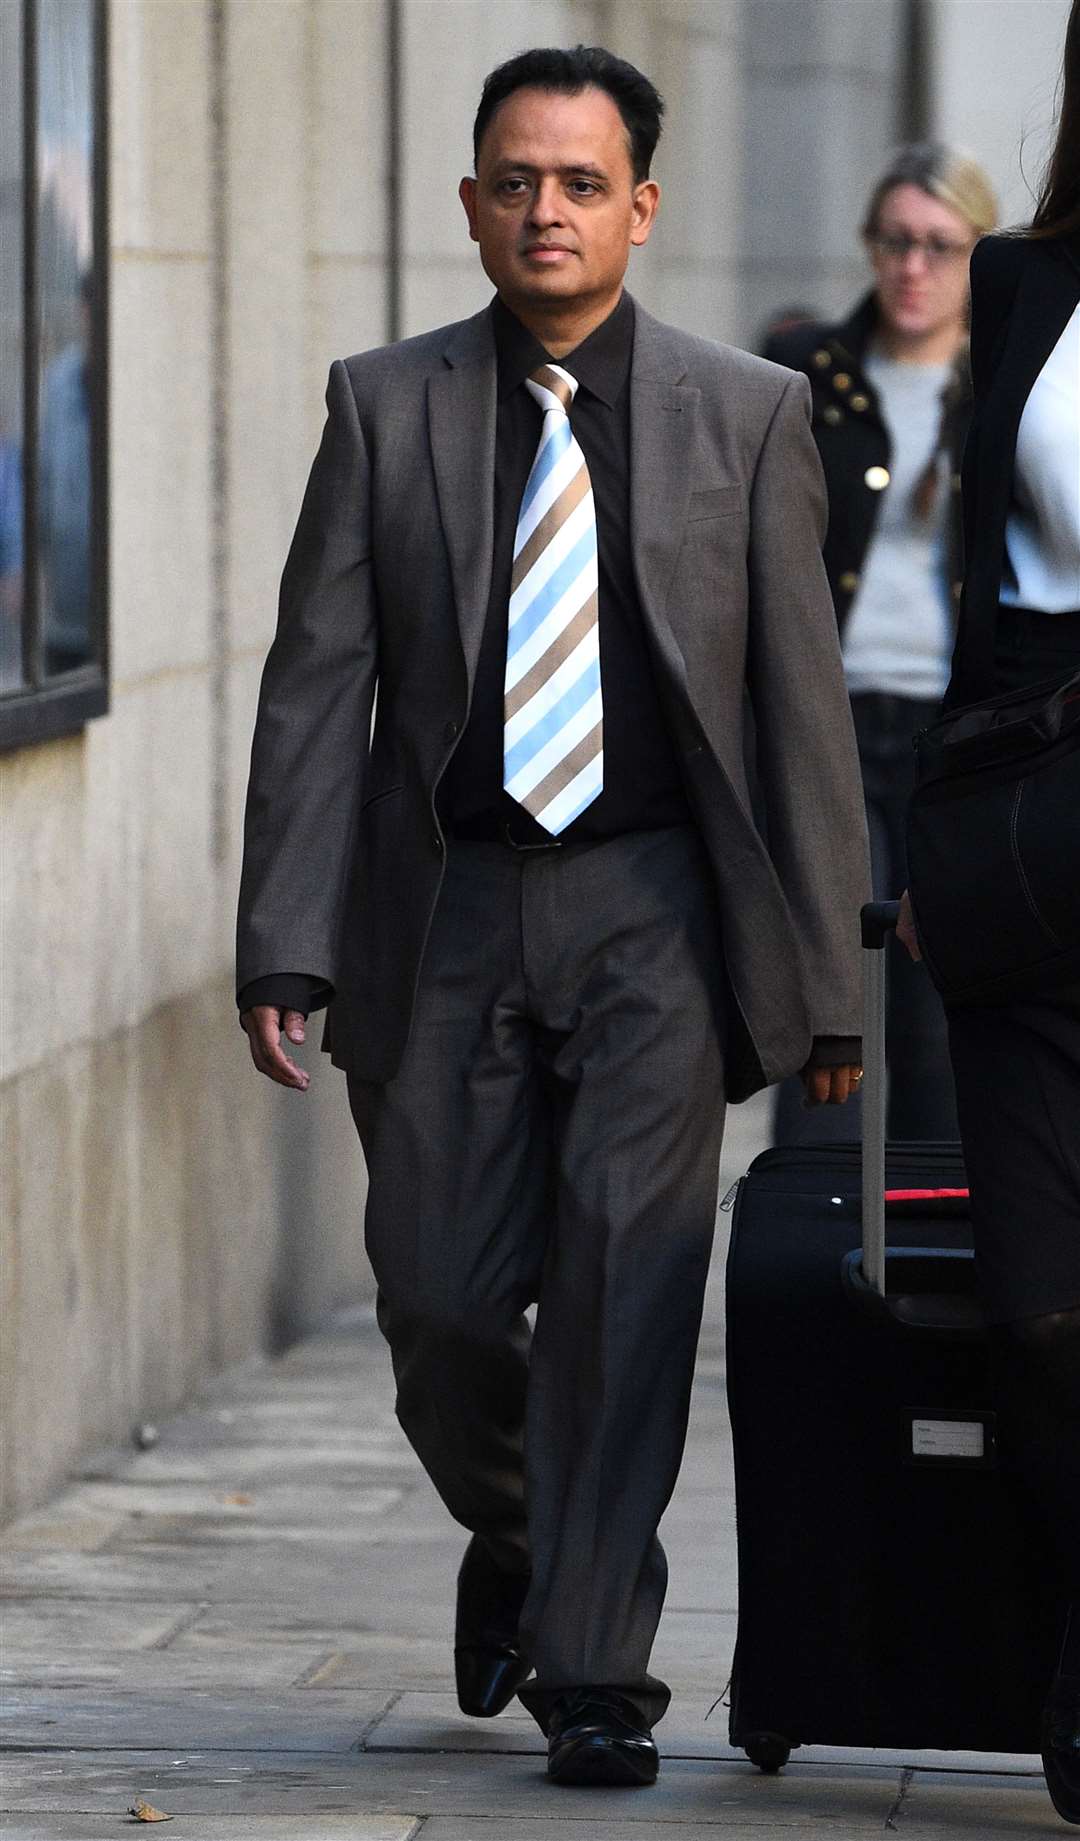 Dr Manish Shah arriving at the Old Bailey in London during an earlier trial (Kirsty O’Connor/PA)